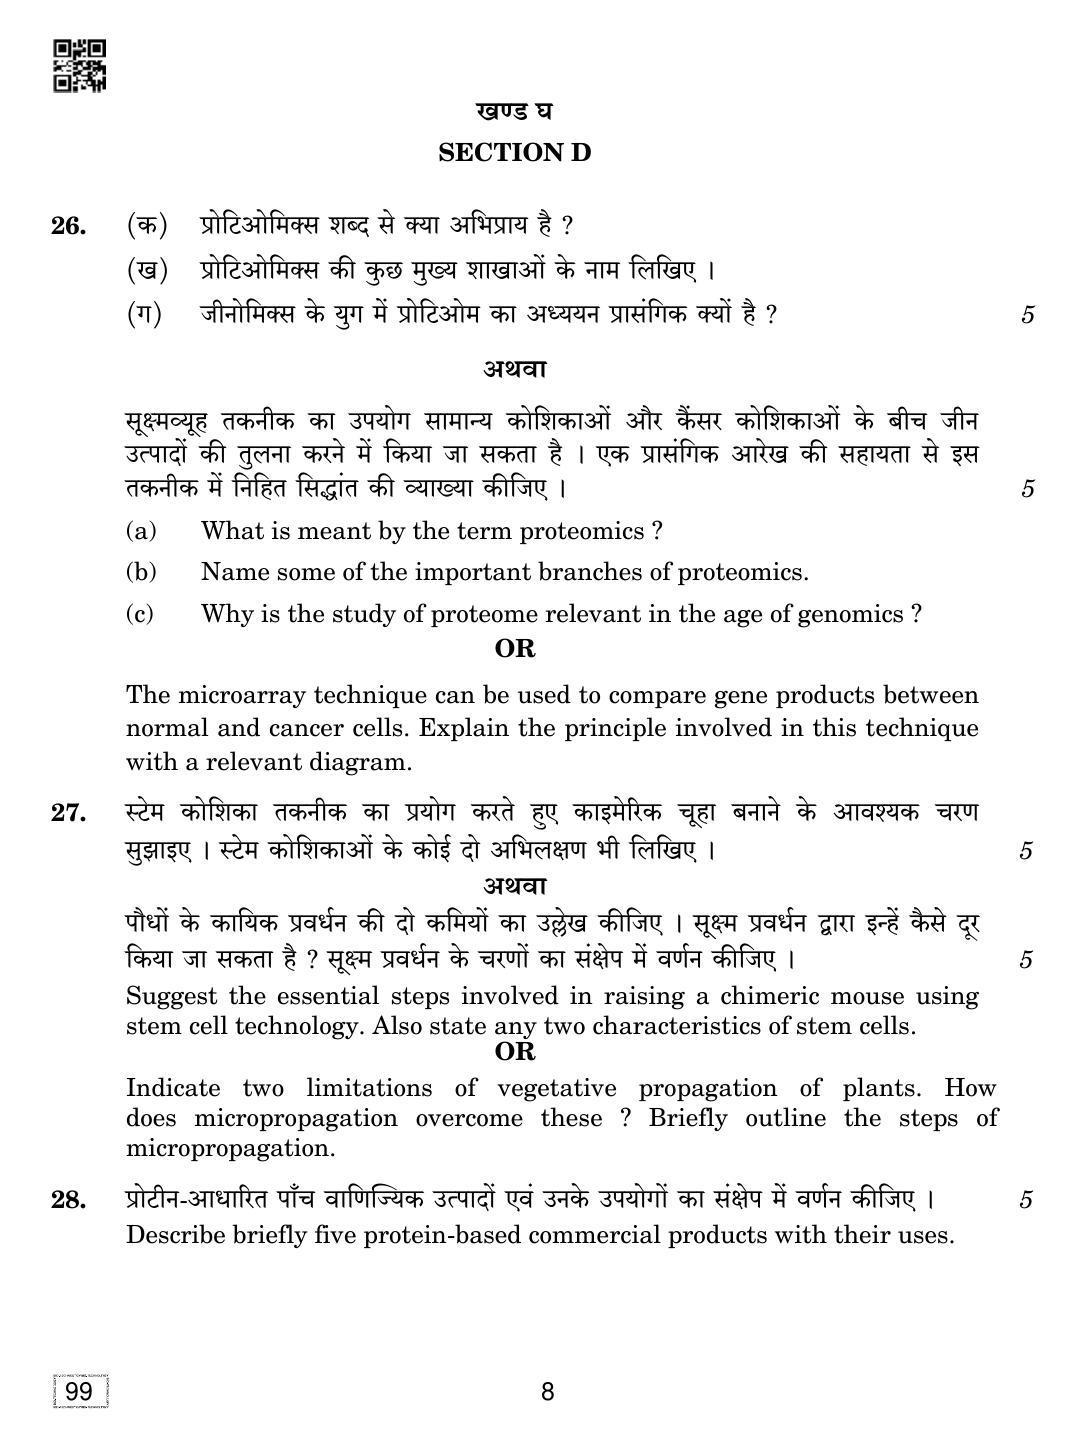 CBSE Class 12 99 BIOTECHNOLOGY 2019 Compartment Question Paper - Page 8